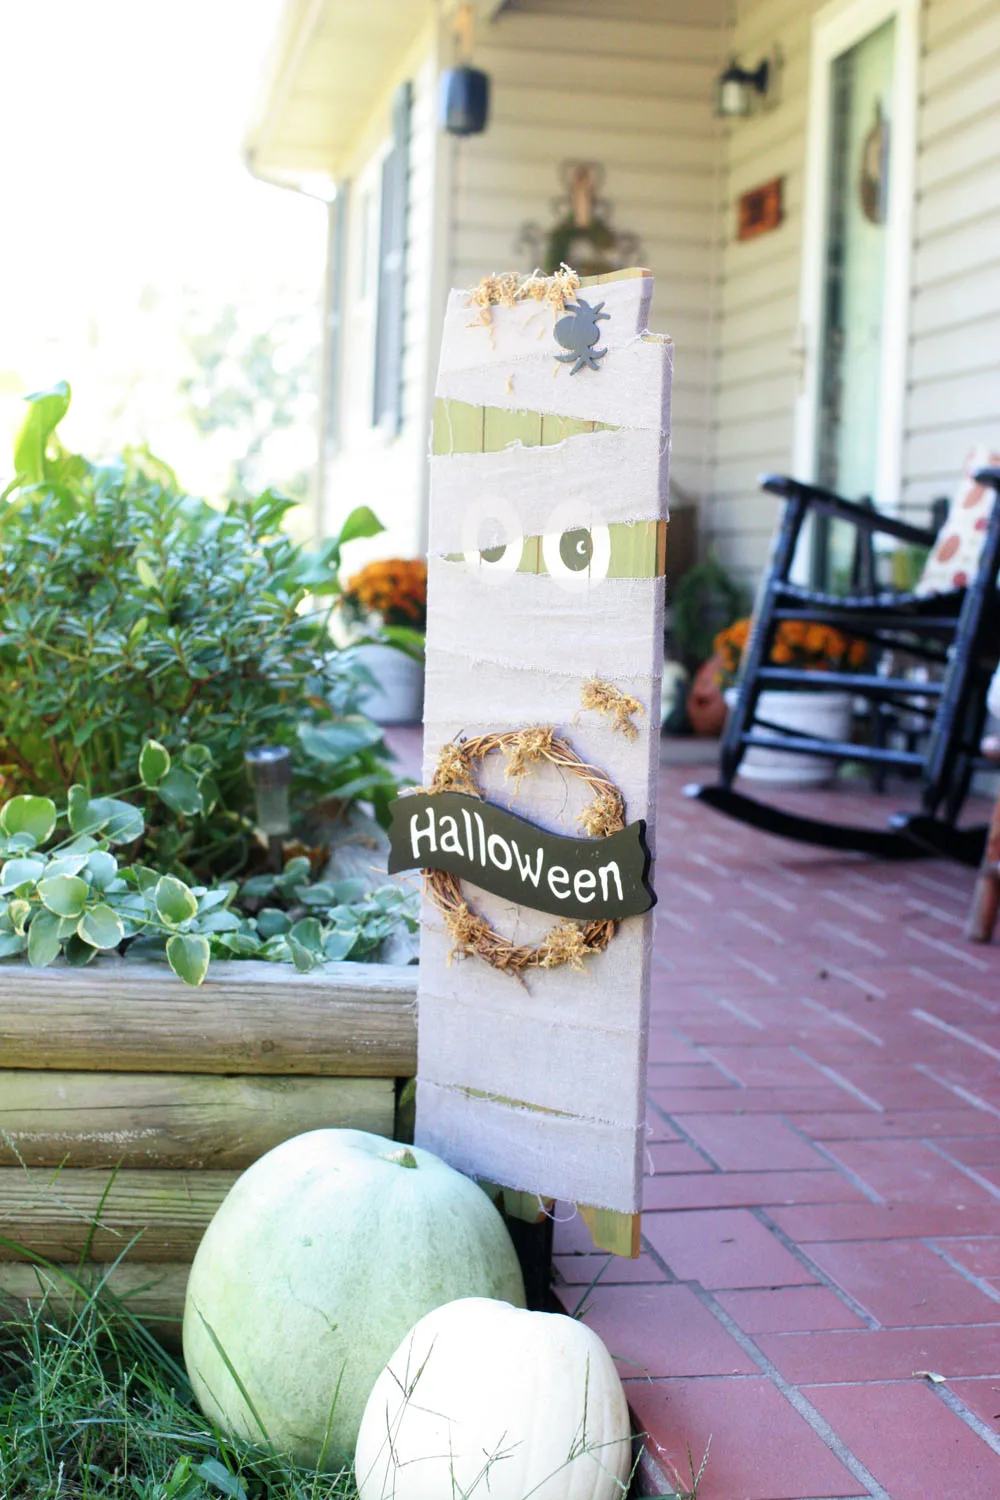 Cute pumpkin display and wooden mummy sign used as DIY outdoor Halloween decorations